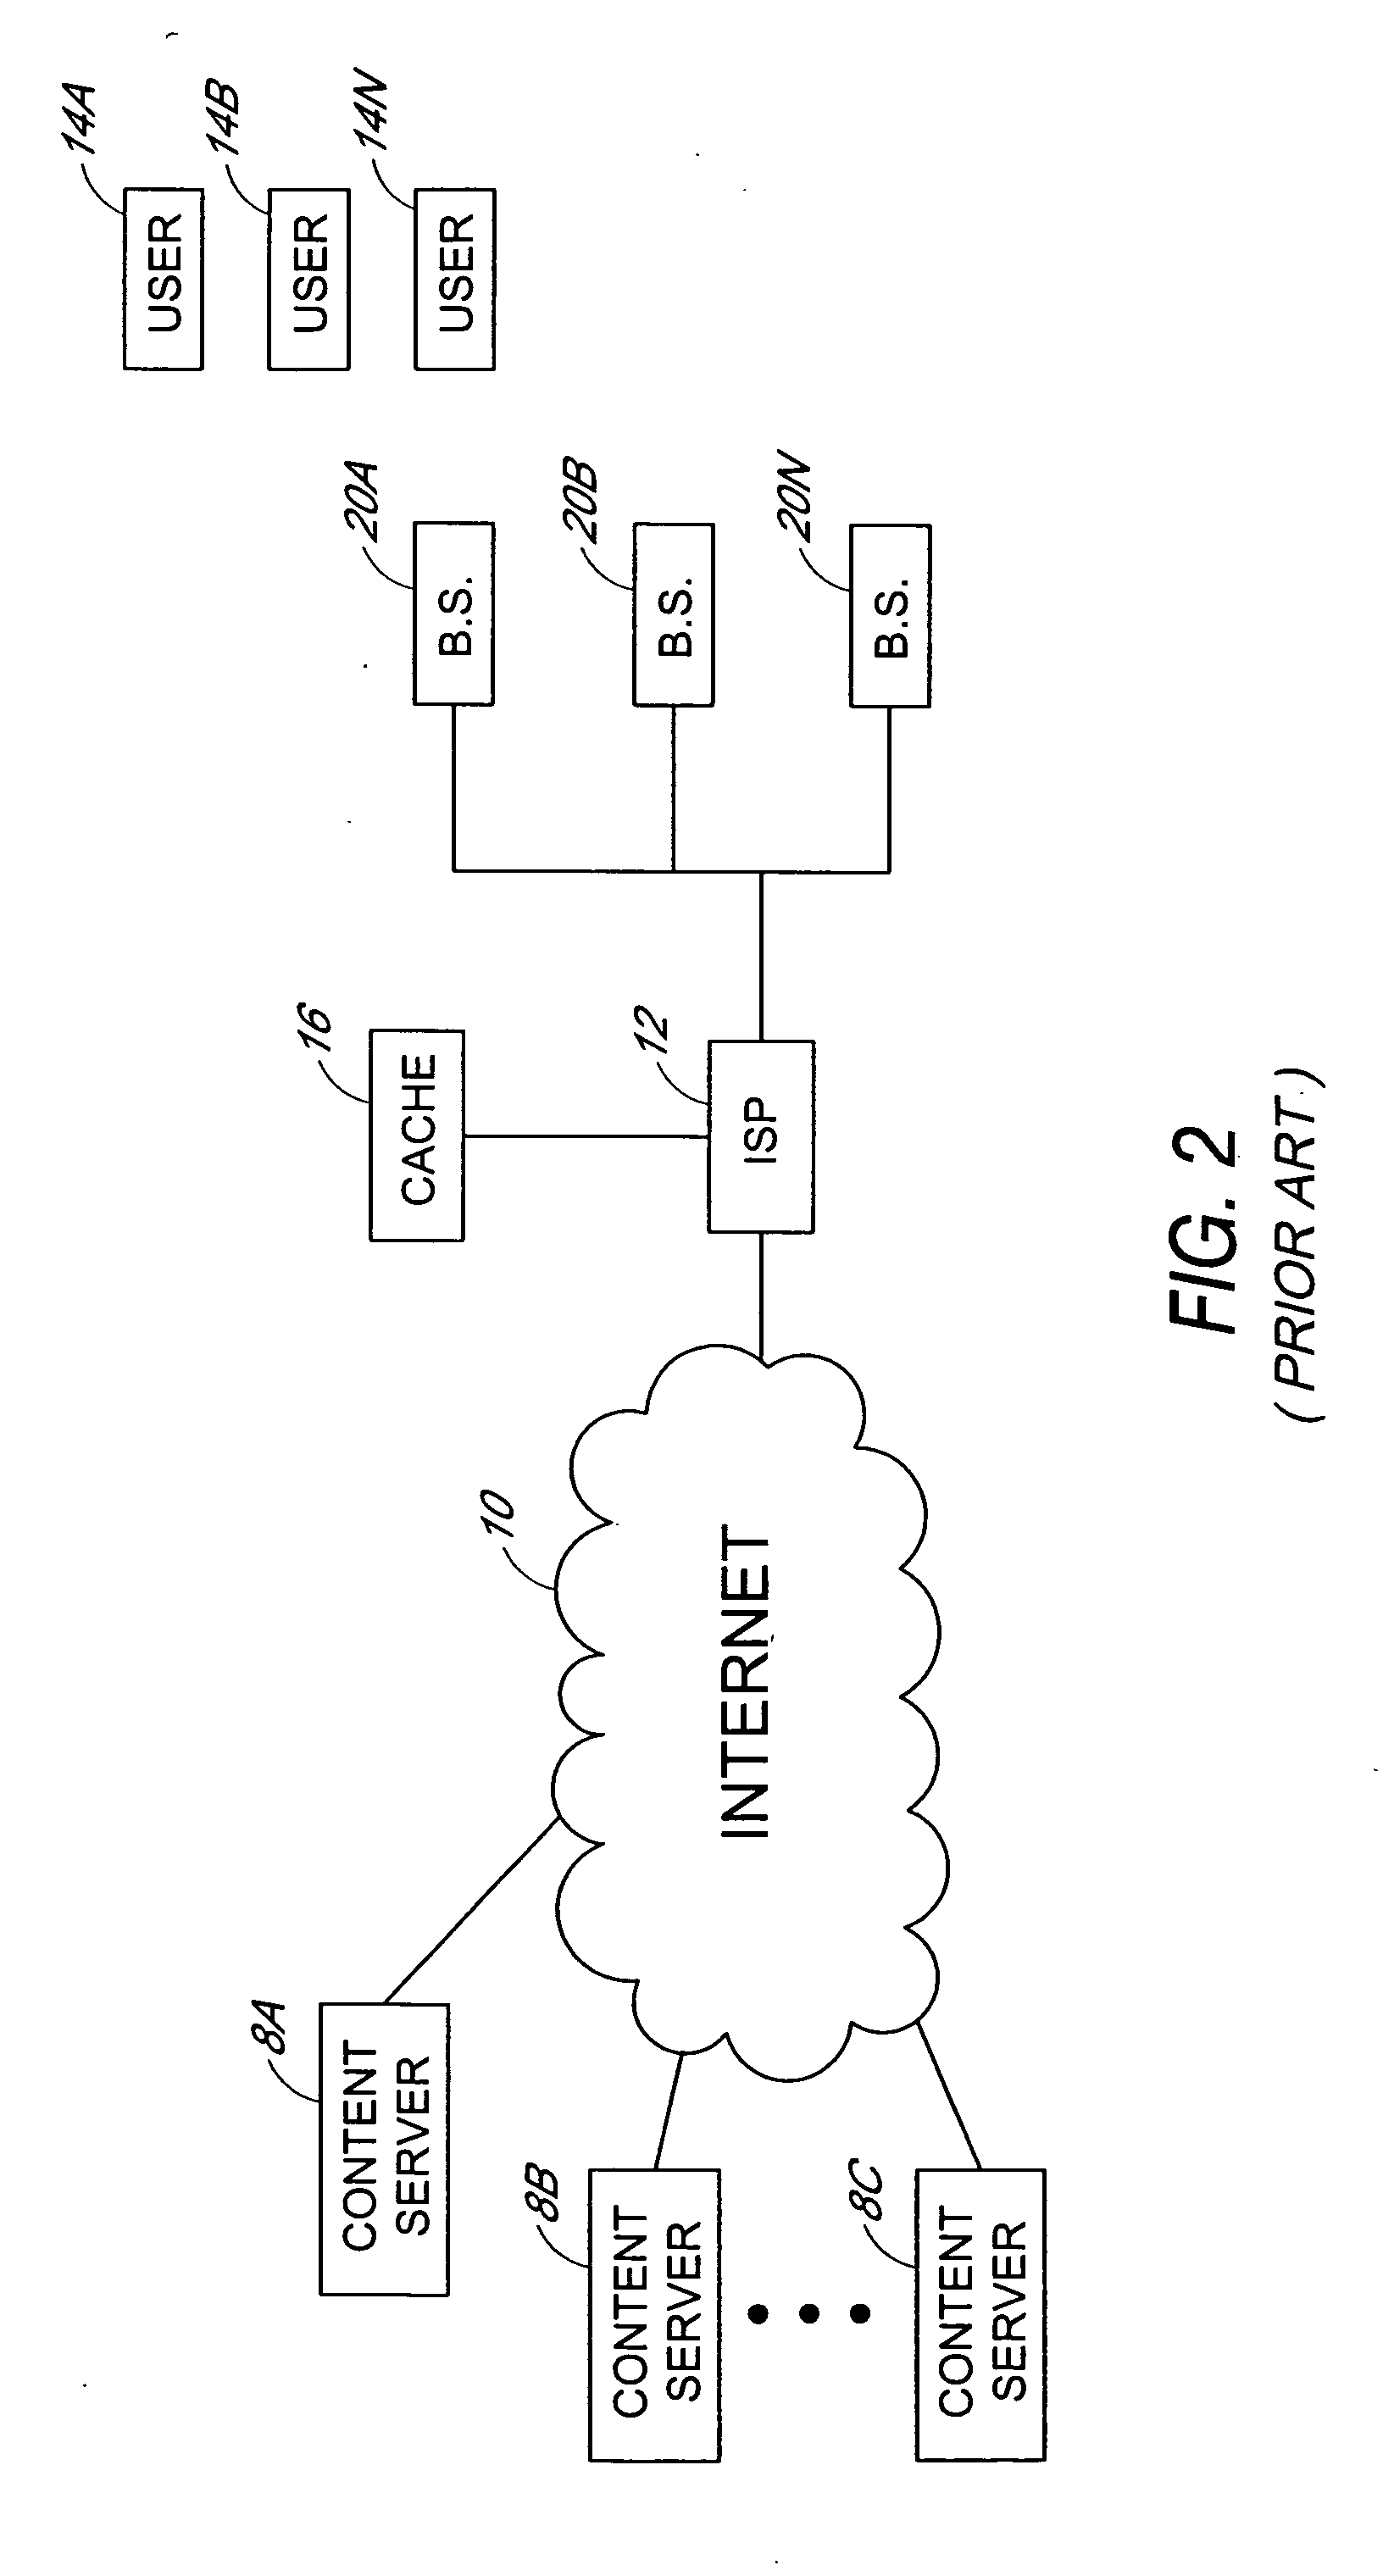 Distributed cache for a wireless communication system